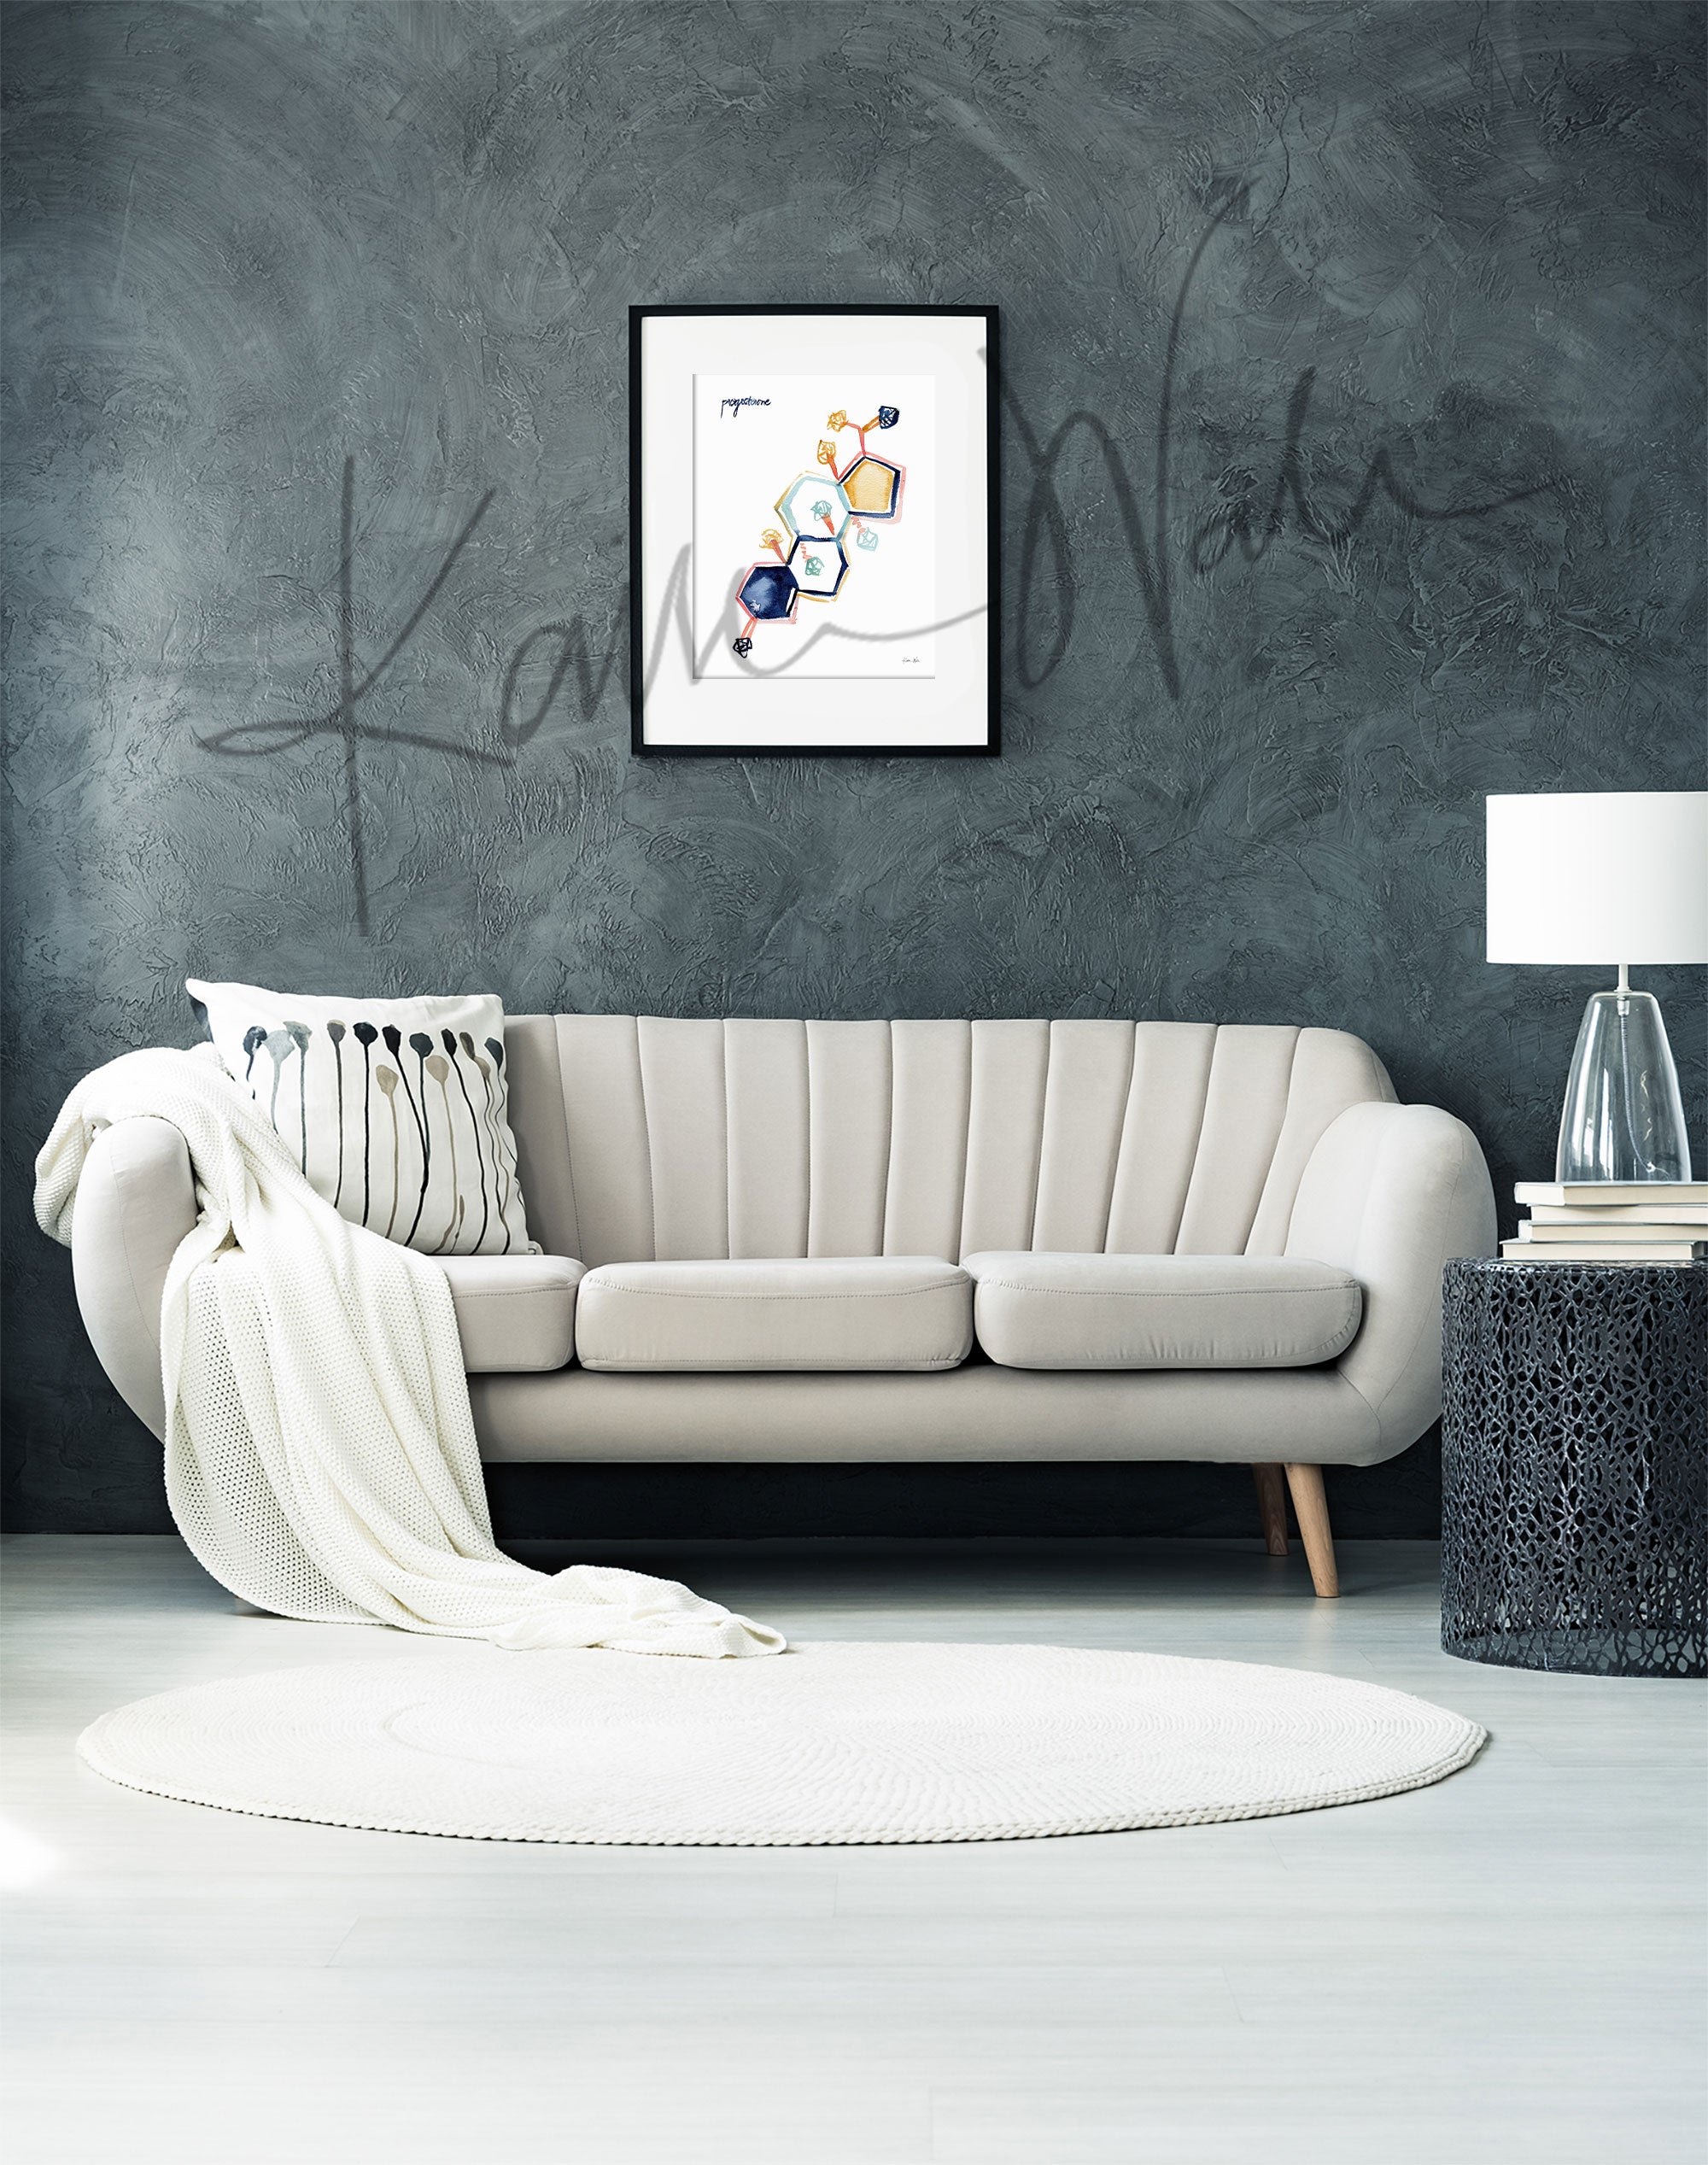 Framed watercolor painting of the progesterone hormone molecular structure. The painting is hanging over a white couch.